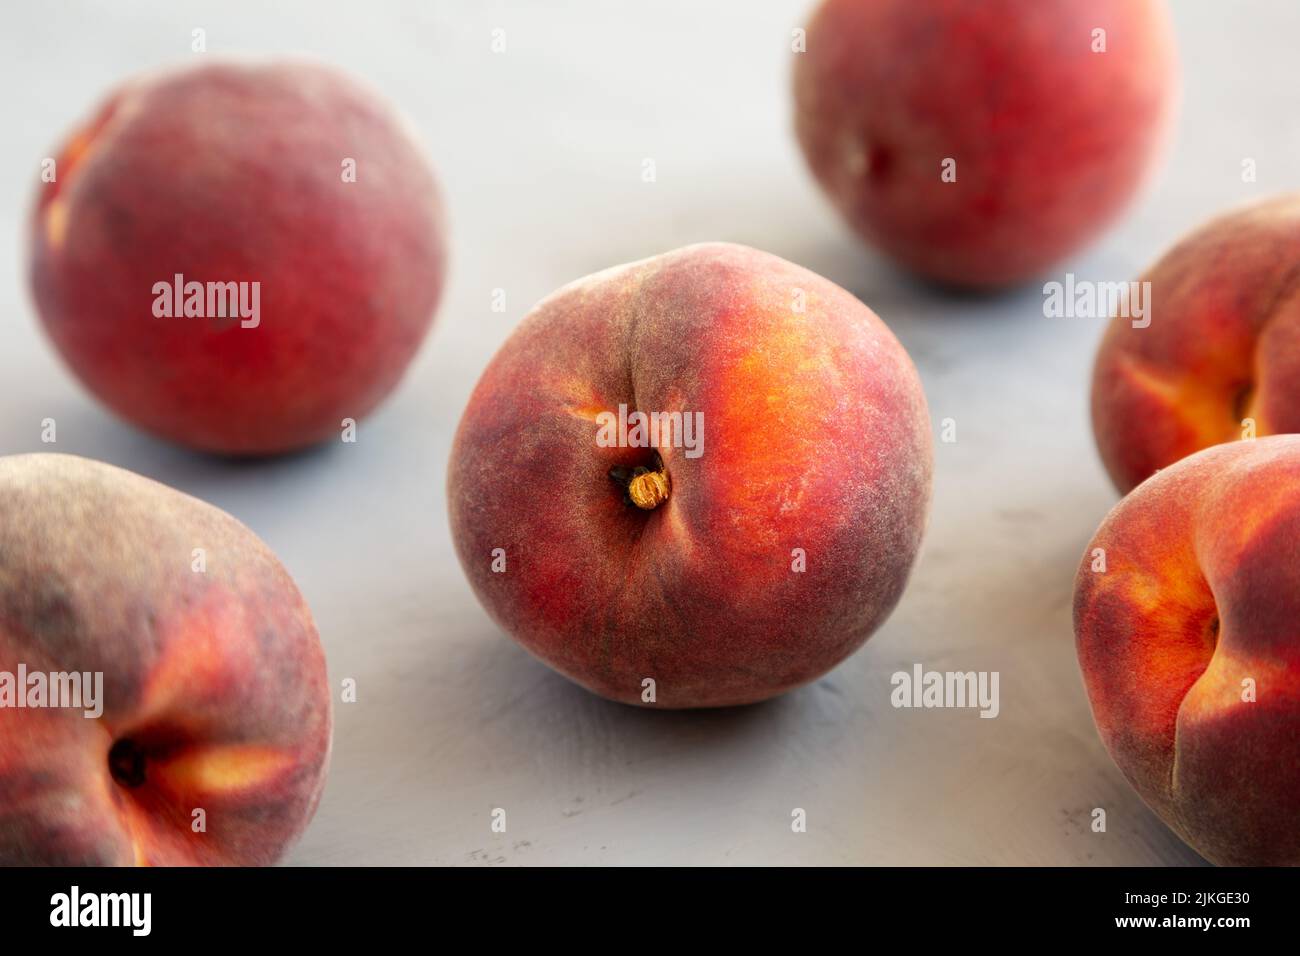 Raw Organic Yellow Peaches on a gray background, side view. Stock Photo